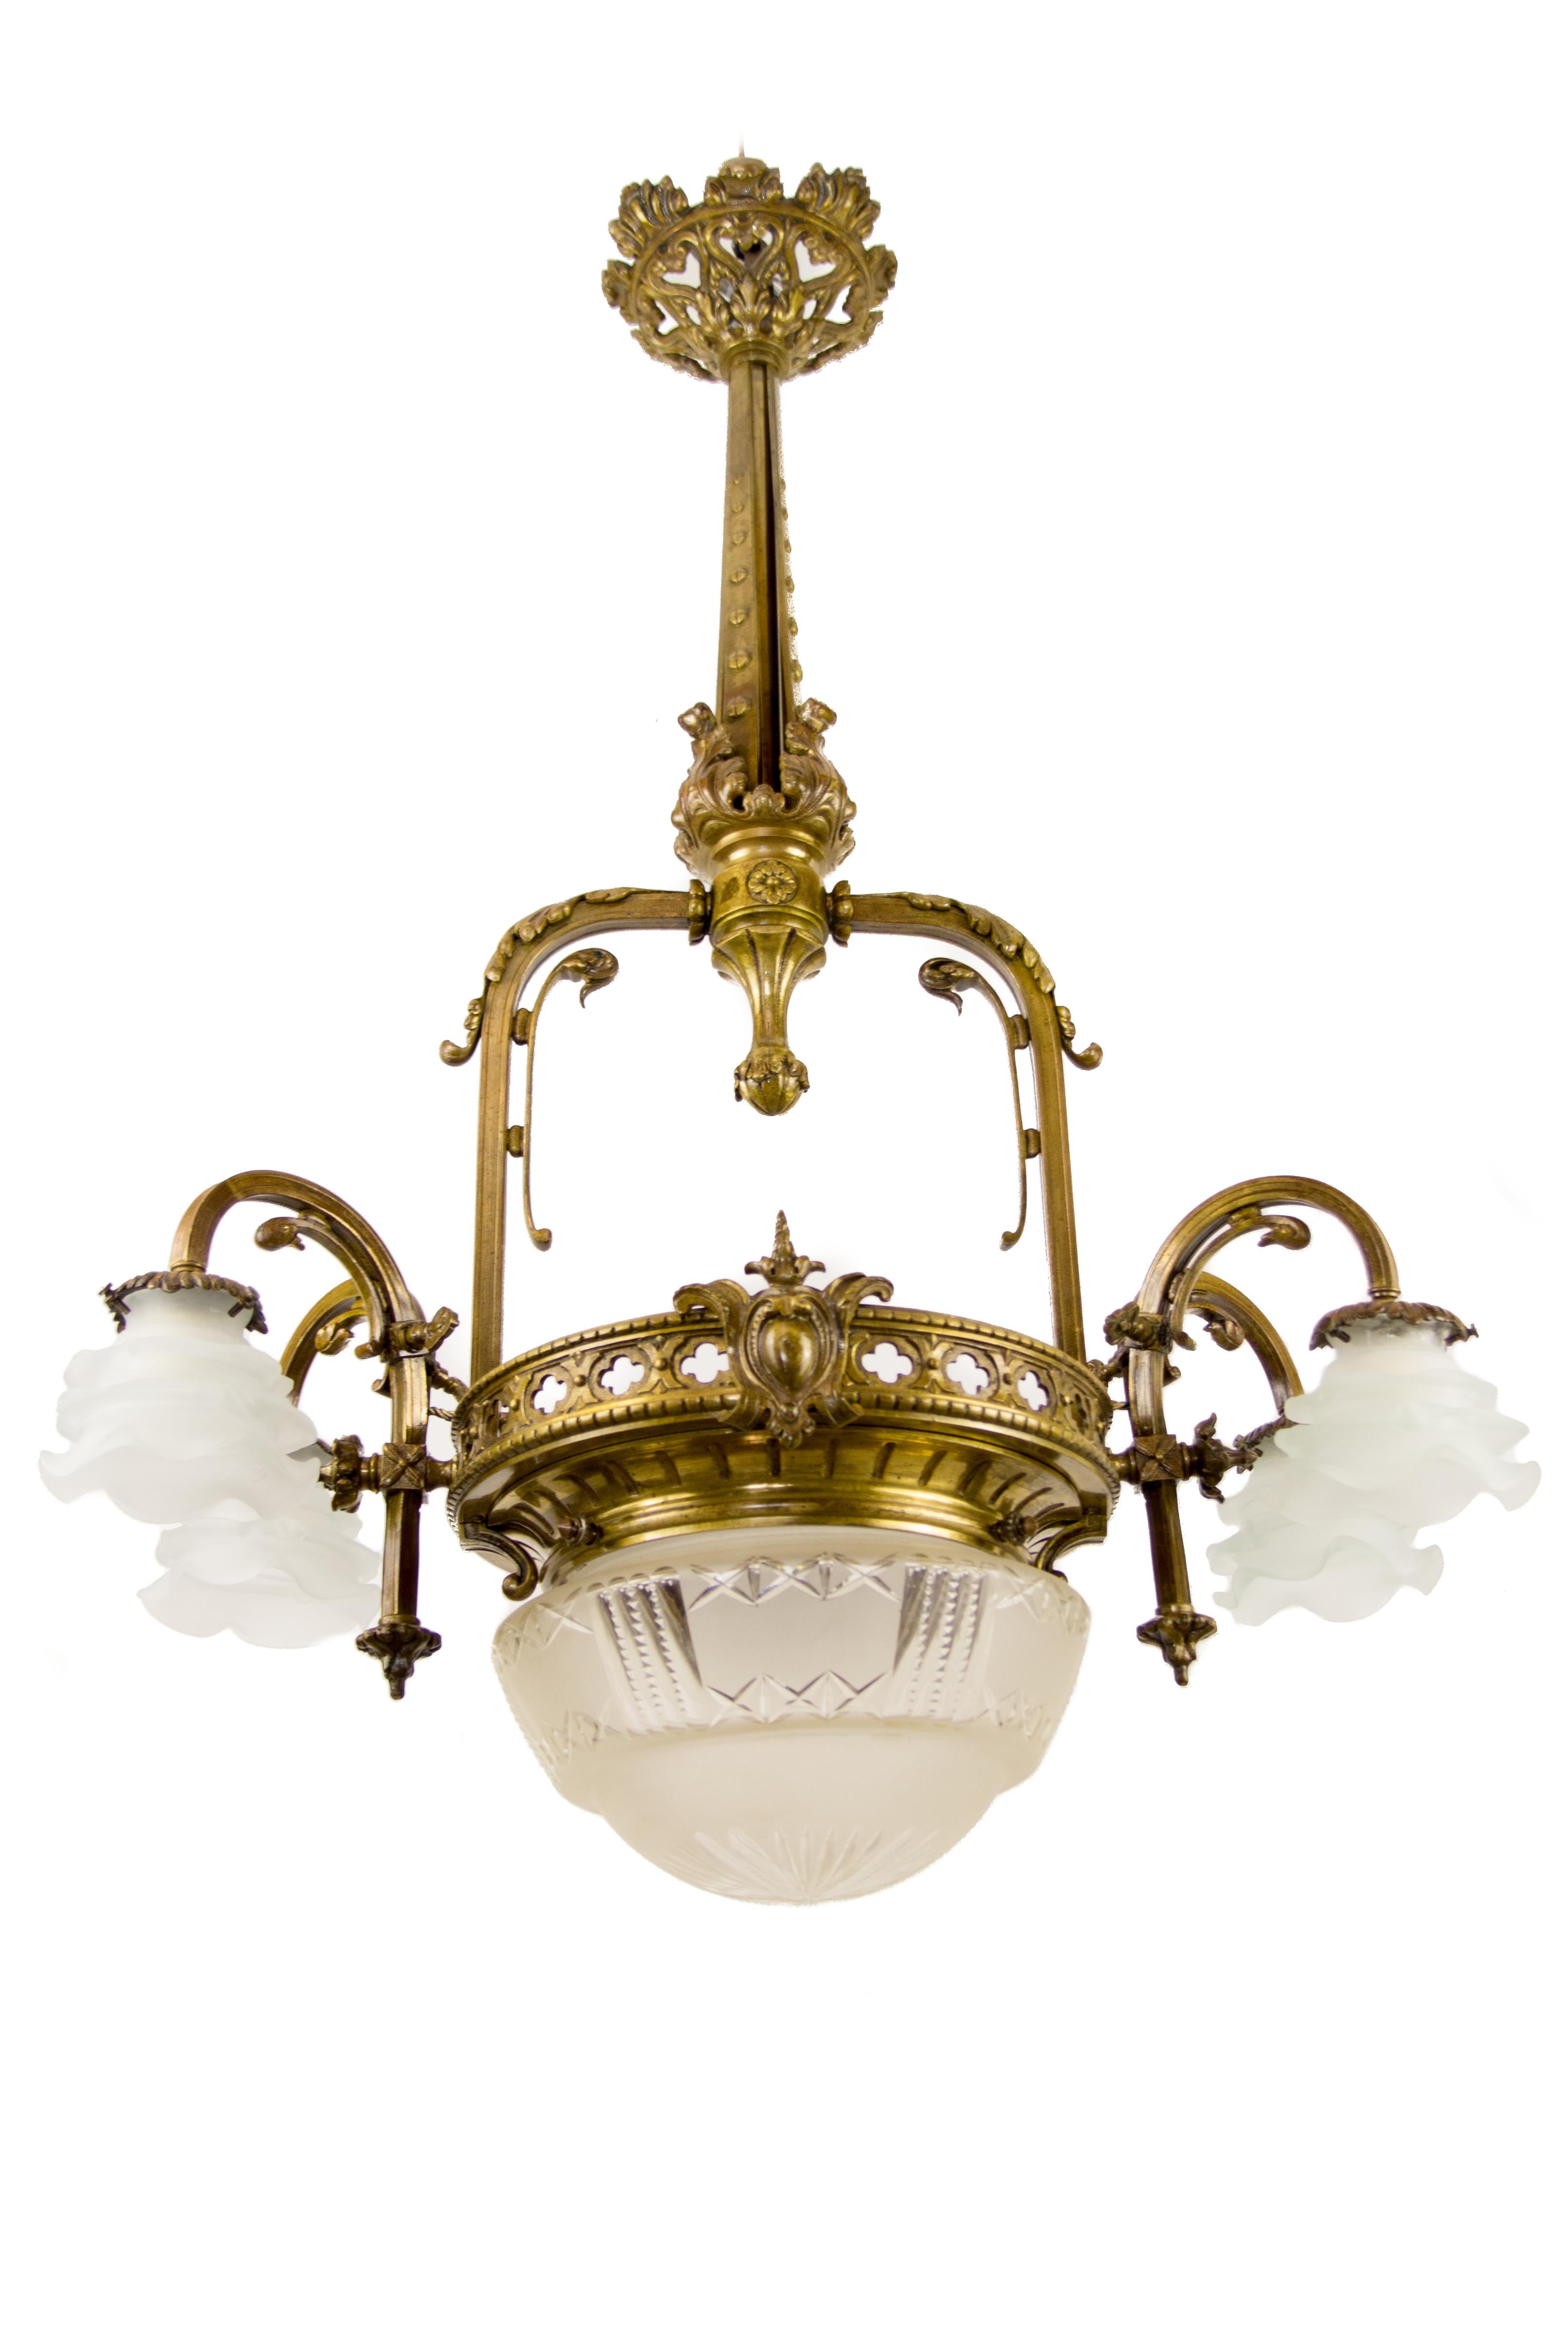 Late 19th-century French Victorian-style electrified gas five-light chandelier. Four bronze arms, each with a socket for the B22 size light bulb and floral-shaped, frosted glass lampshade (newer shades). The bottom center with the original cut glass